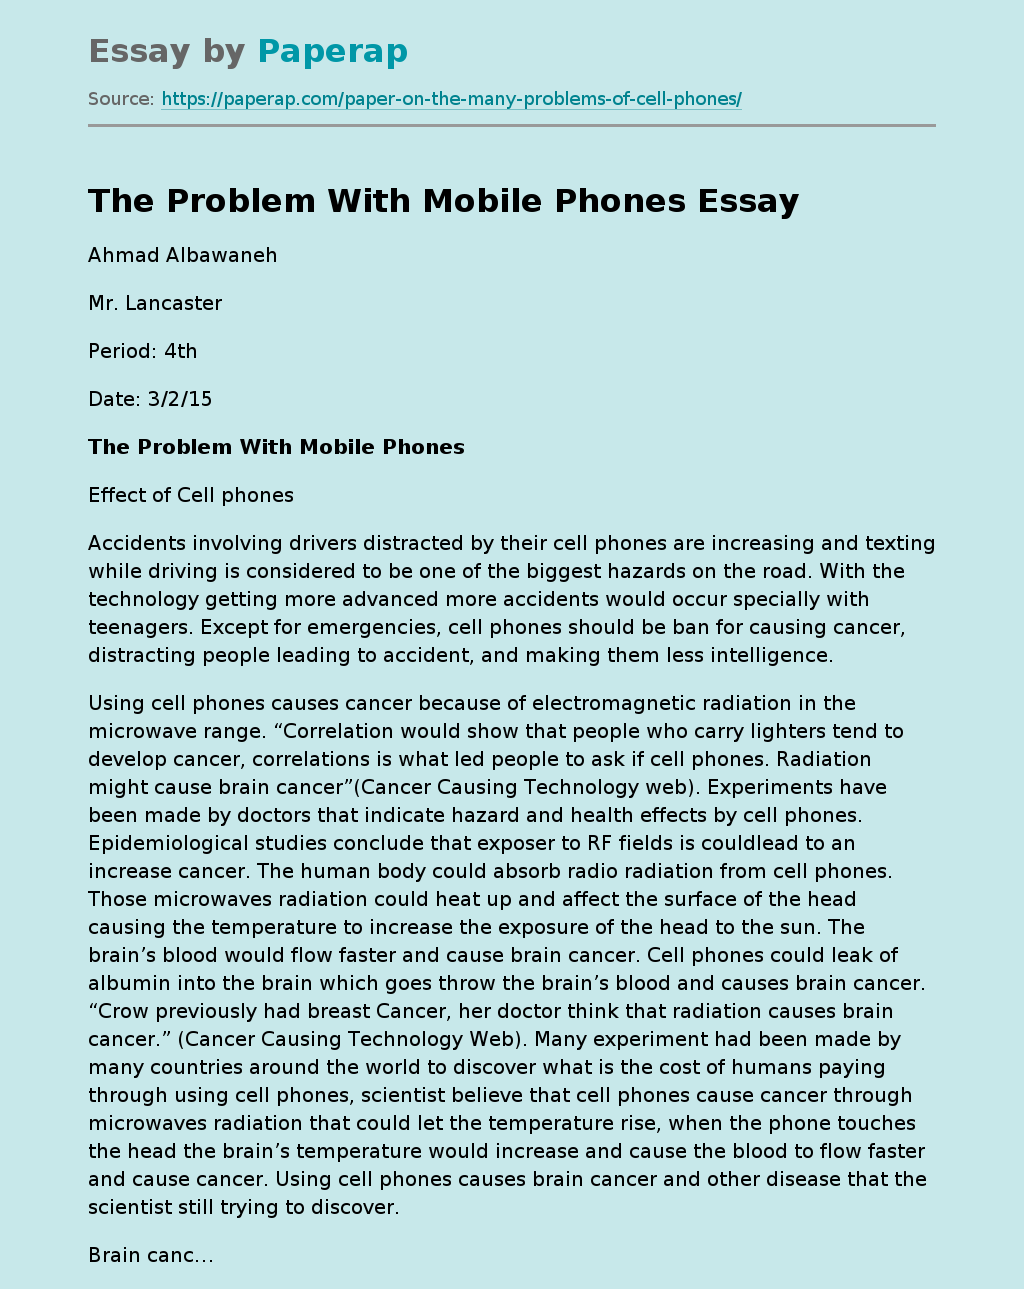 The Problem With Mobile Phones